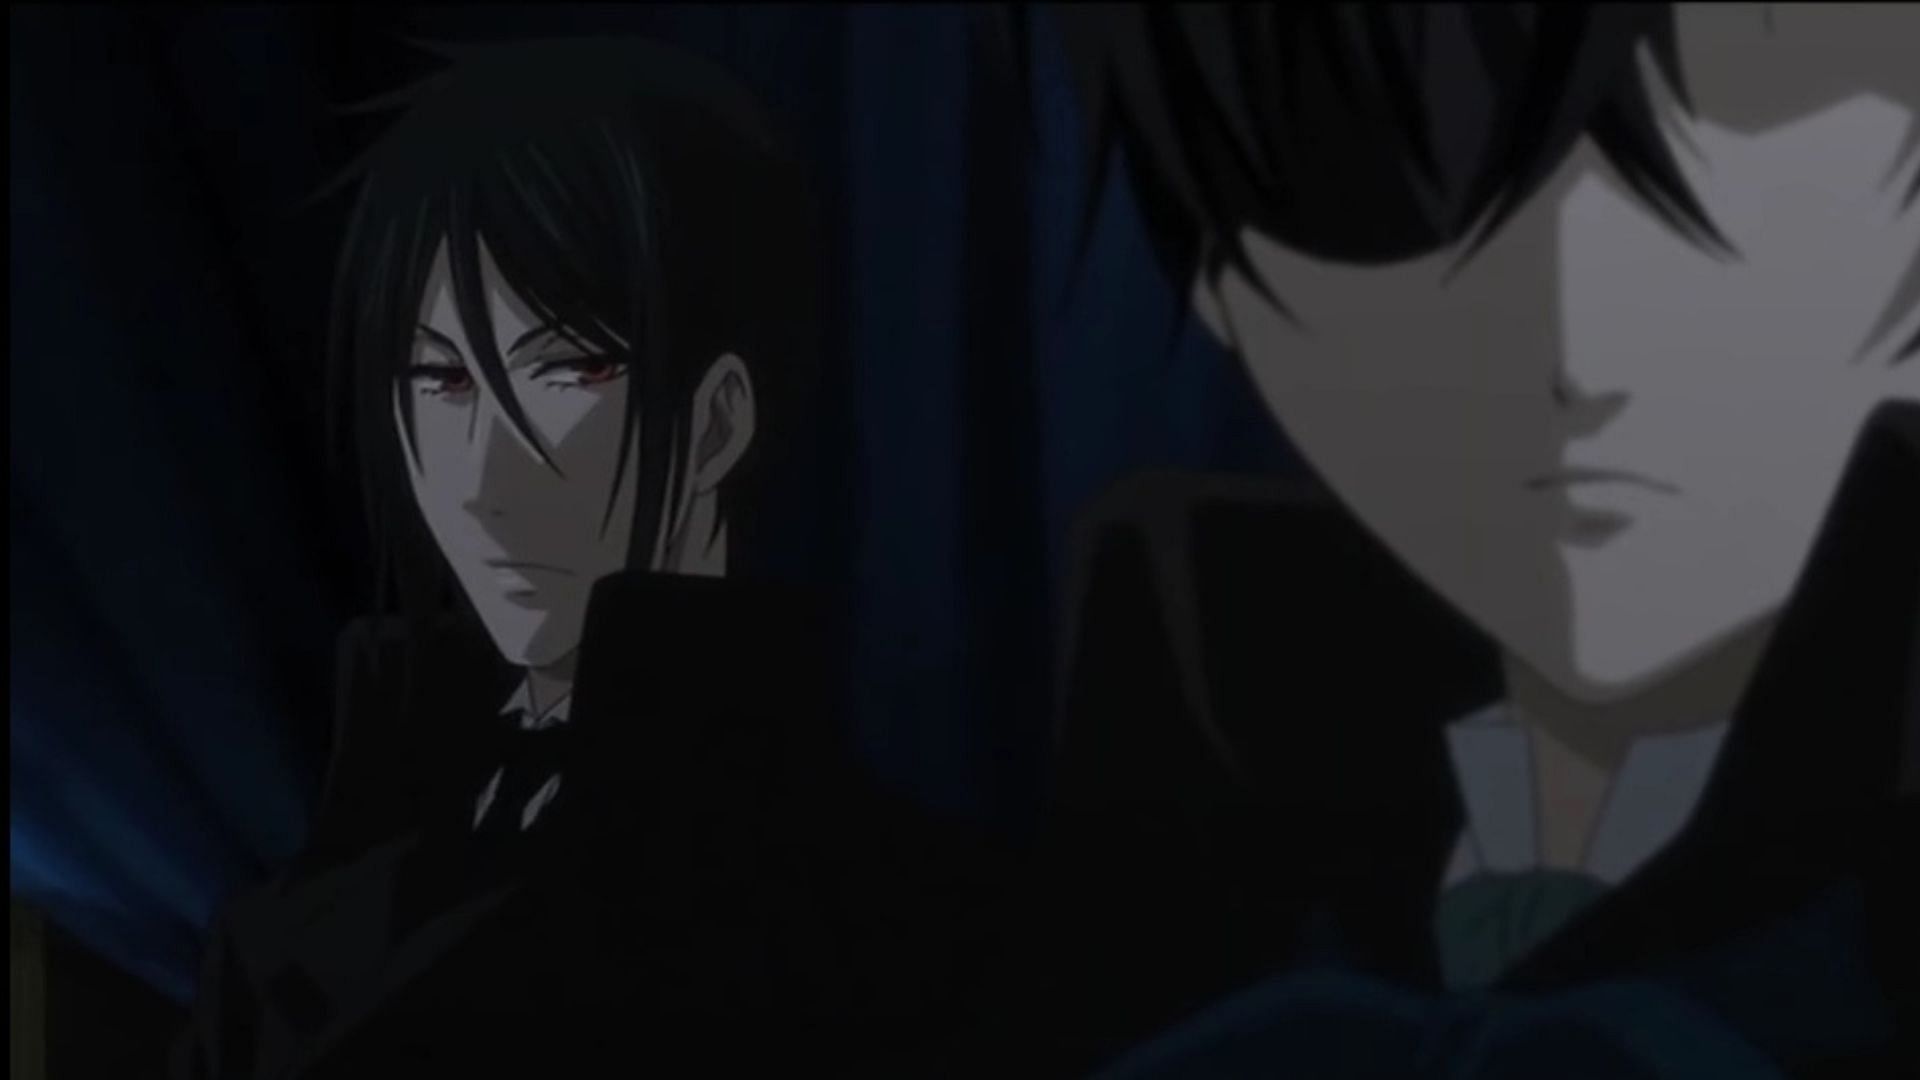 Sebastian and Ciel Black Butler, a show hosted on the anime channel (Image via A-1 Pictures)